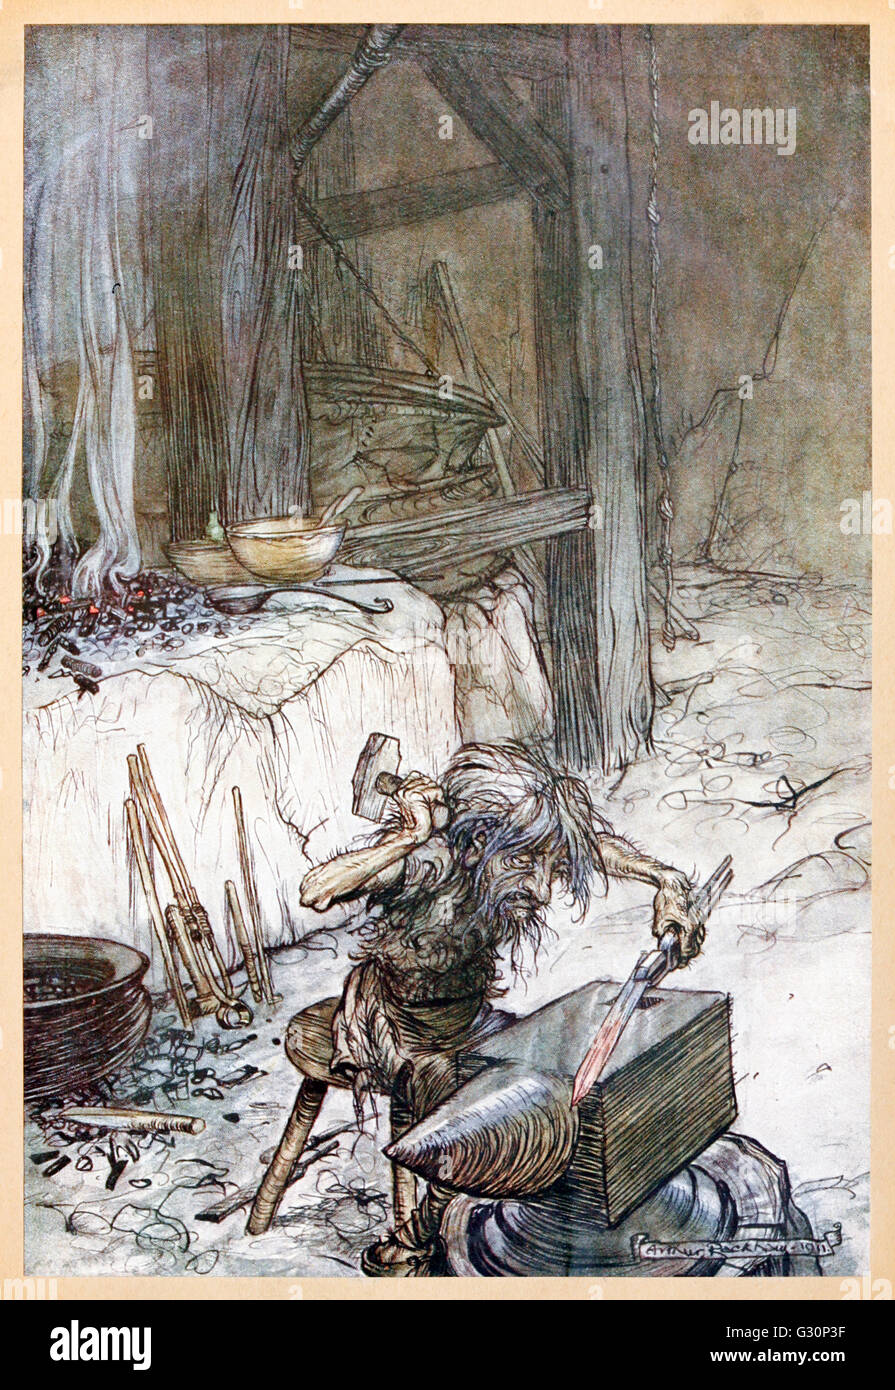 “Mime at the Anvil” from 'Siegfried & The Twilight of the Gods' illustrated by Arthur Rackham (1867-1939). See description for more information. Stock Photo